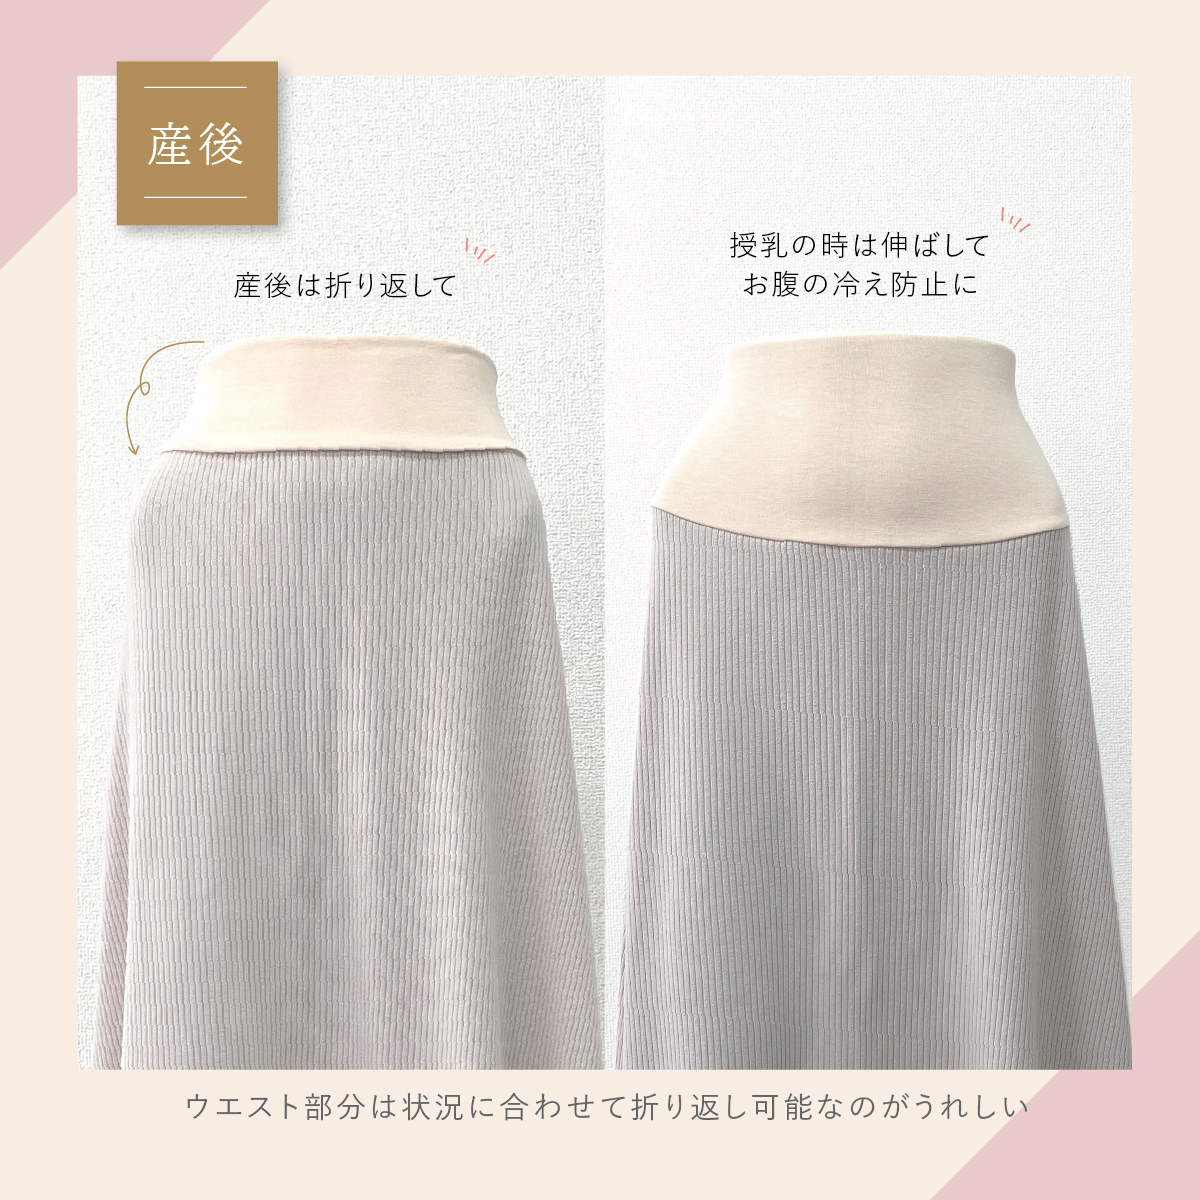 [ Korea fine quality material ] Korea maternity wear rib A line skirt maternity clothes .. clothes production front postpartum combined use . month dressing up pretty skirt rib ( free shipping )